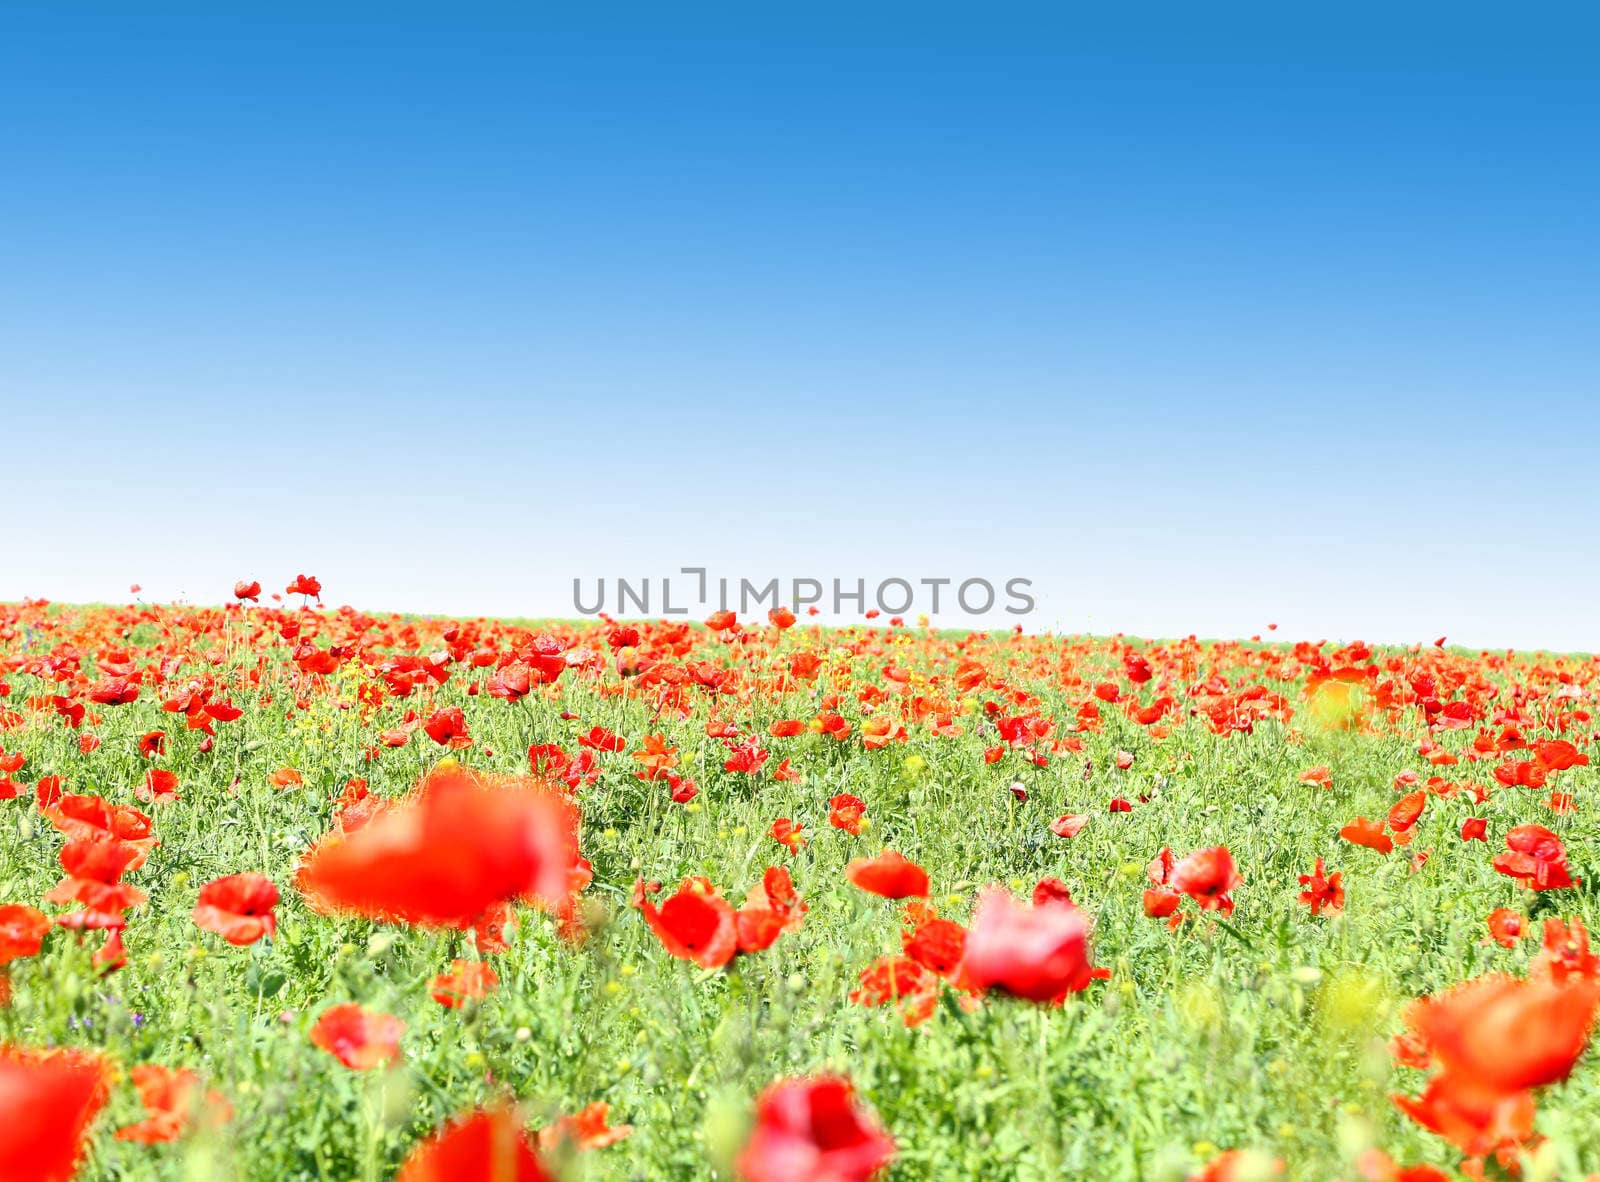 Poppy flowers against the blue sky as abackground.